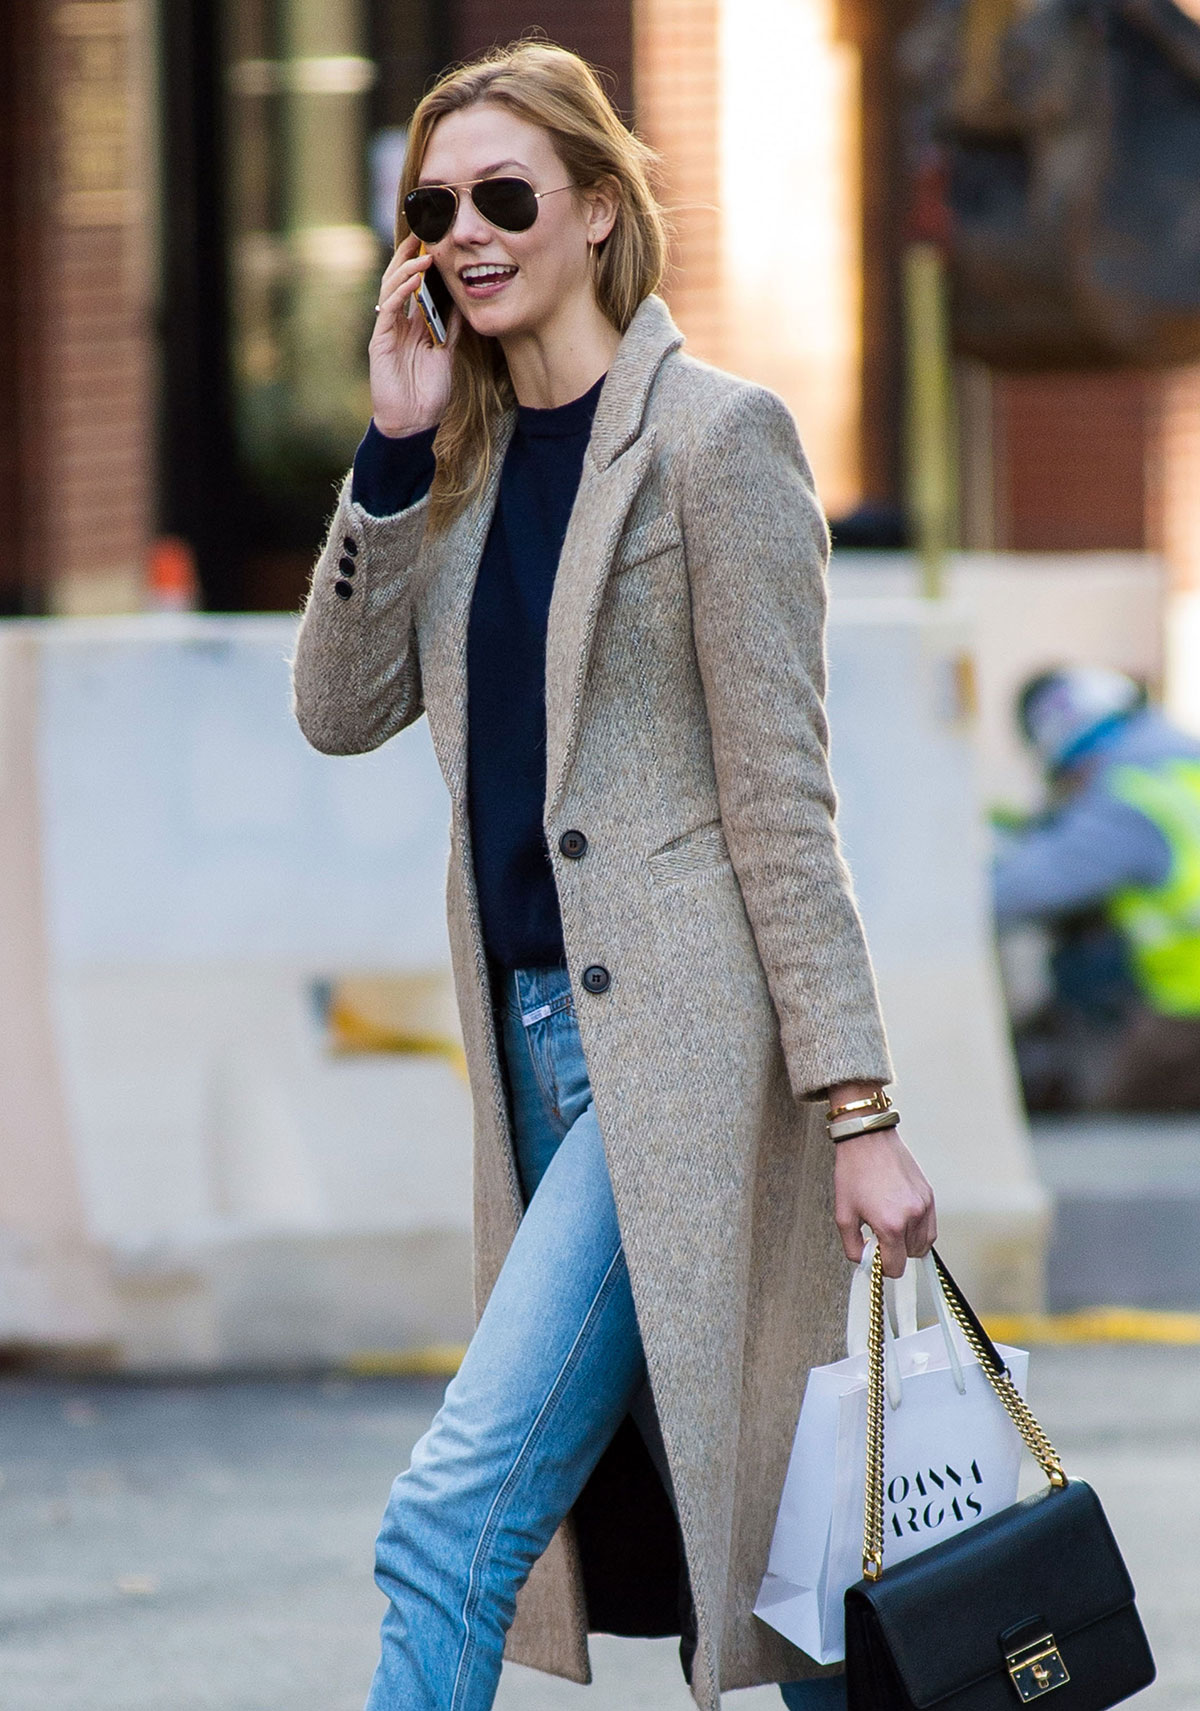 KARLIE KLOSS Out and About in New York 11/17/2015 – HawtCelebs